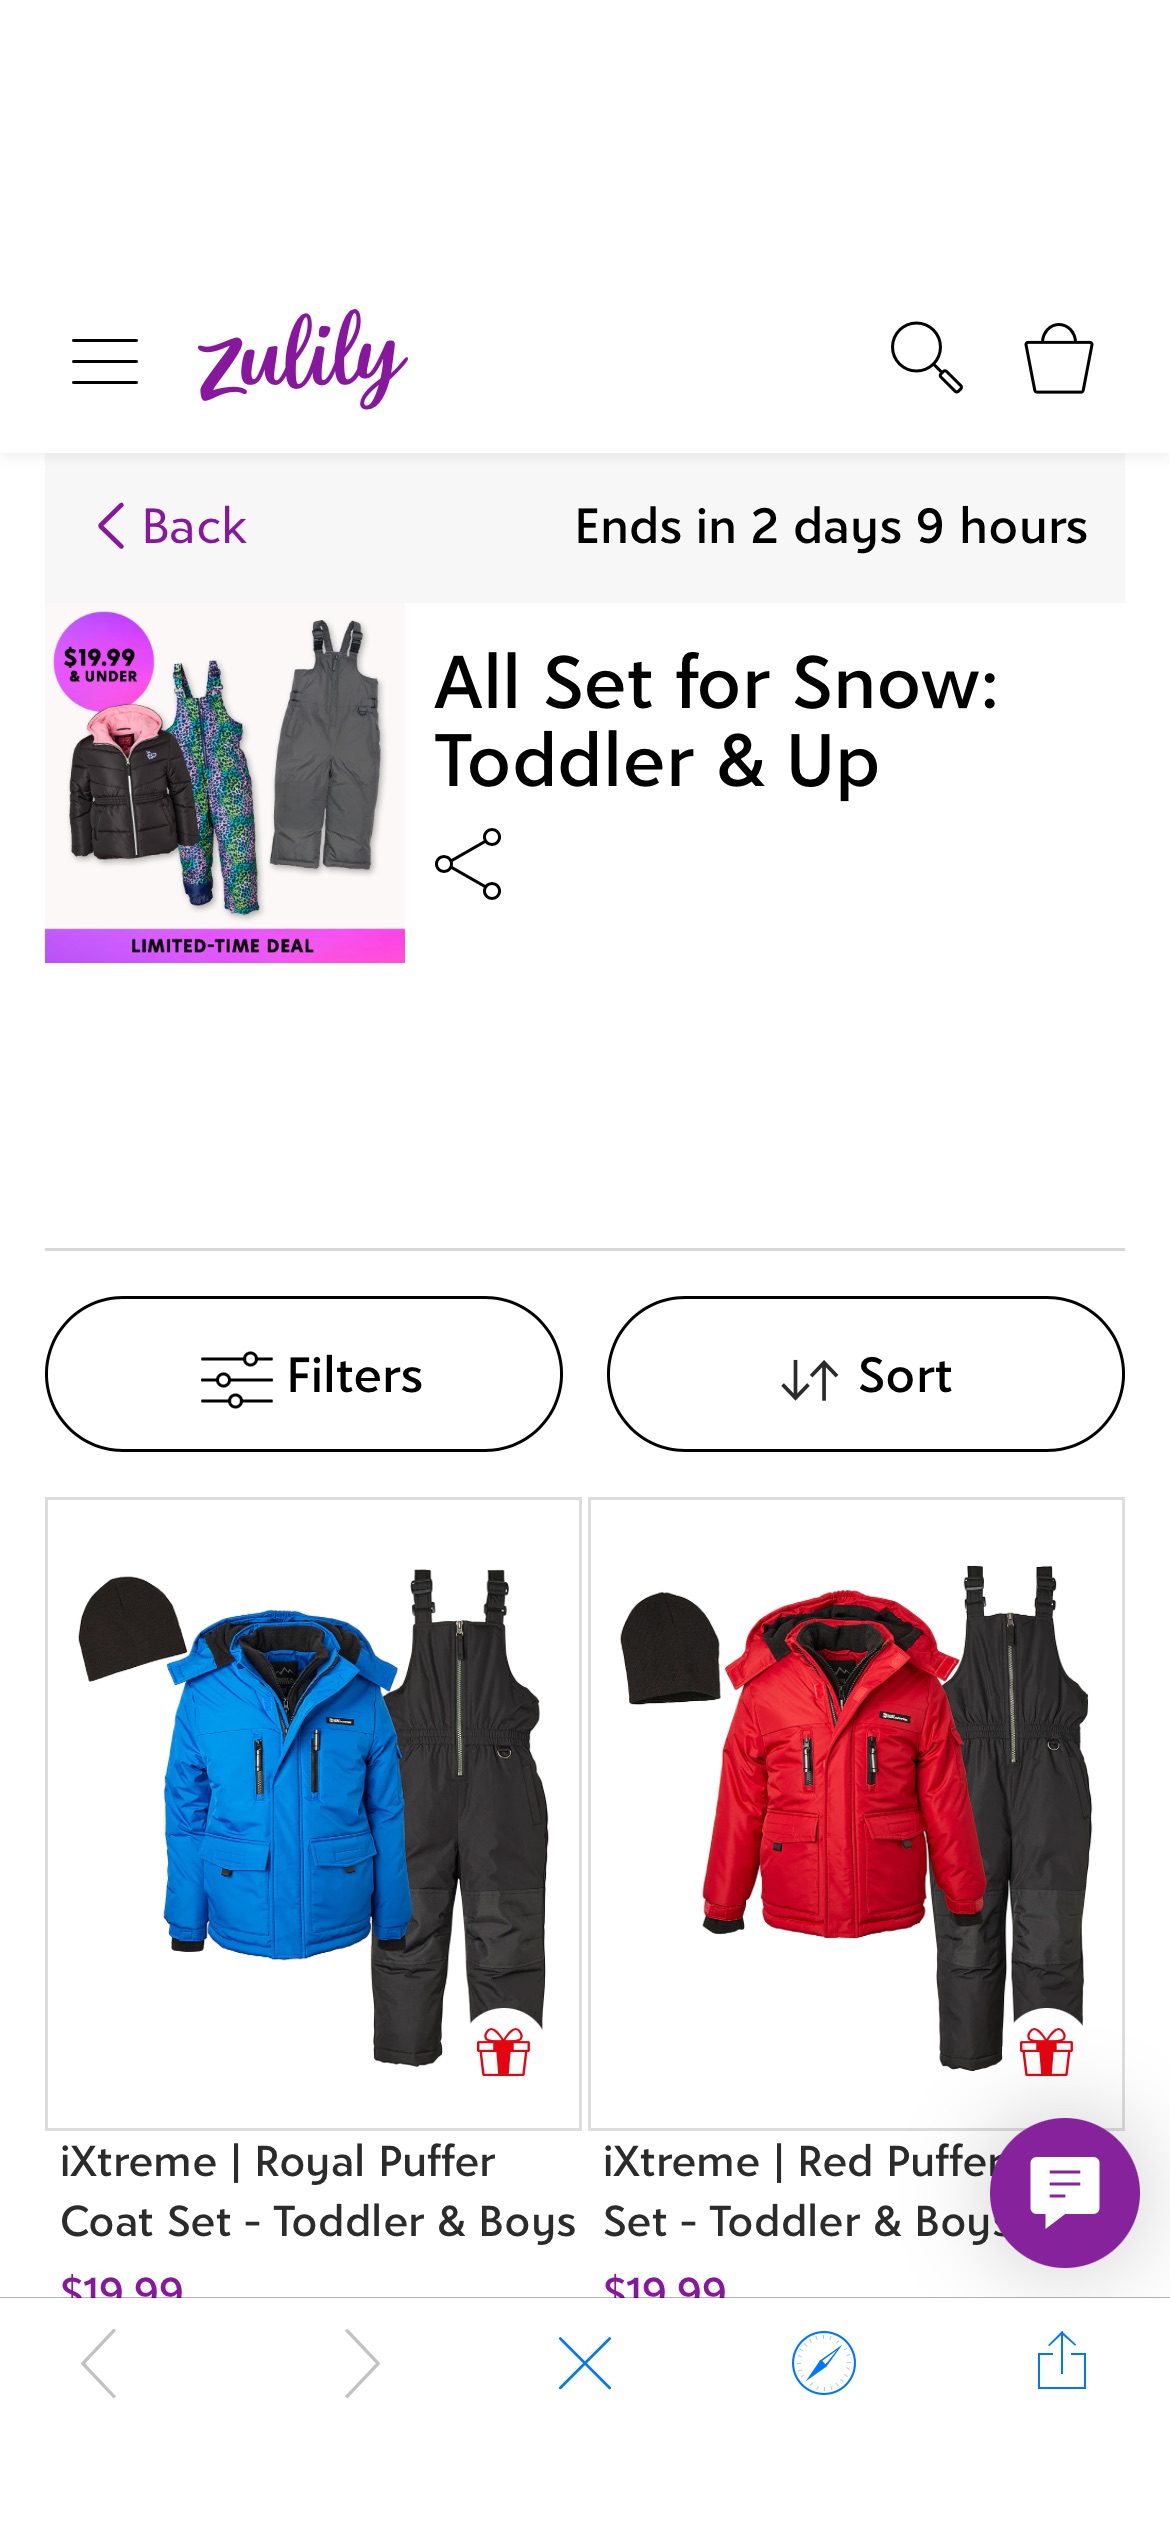 All Set for Snow: Toddler & Up – Zulily